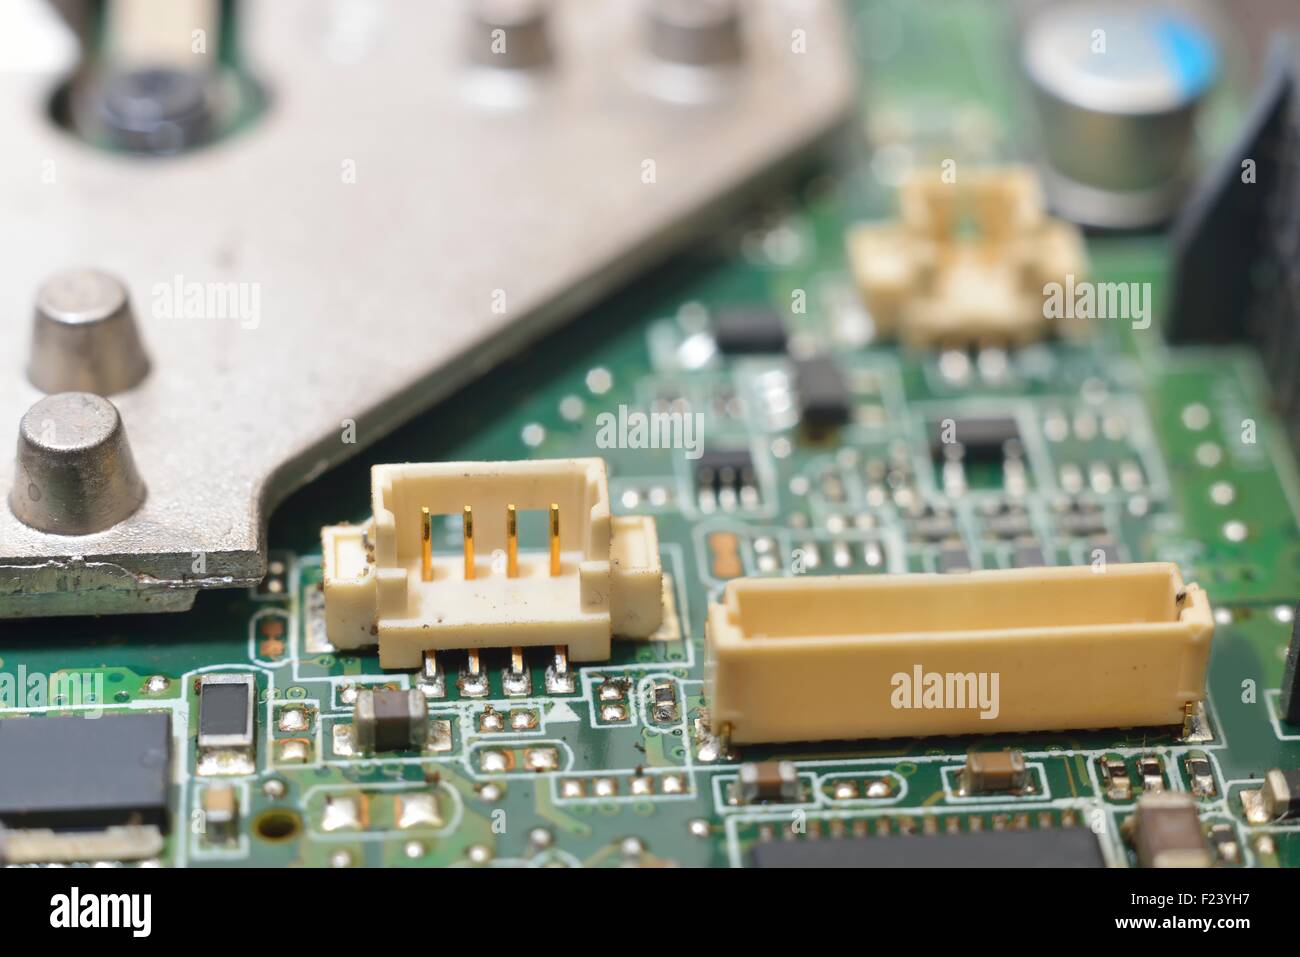 slots on matherboard (microcircuit) with microchip and radiators Stock Photo